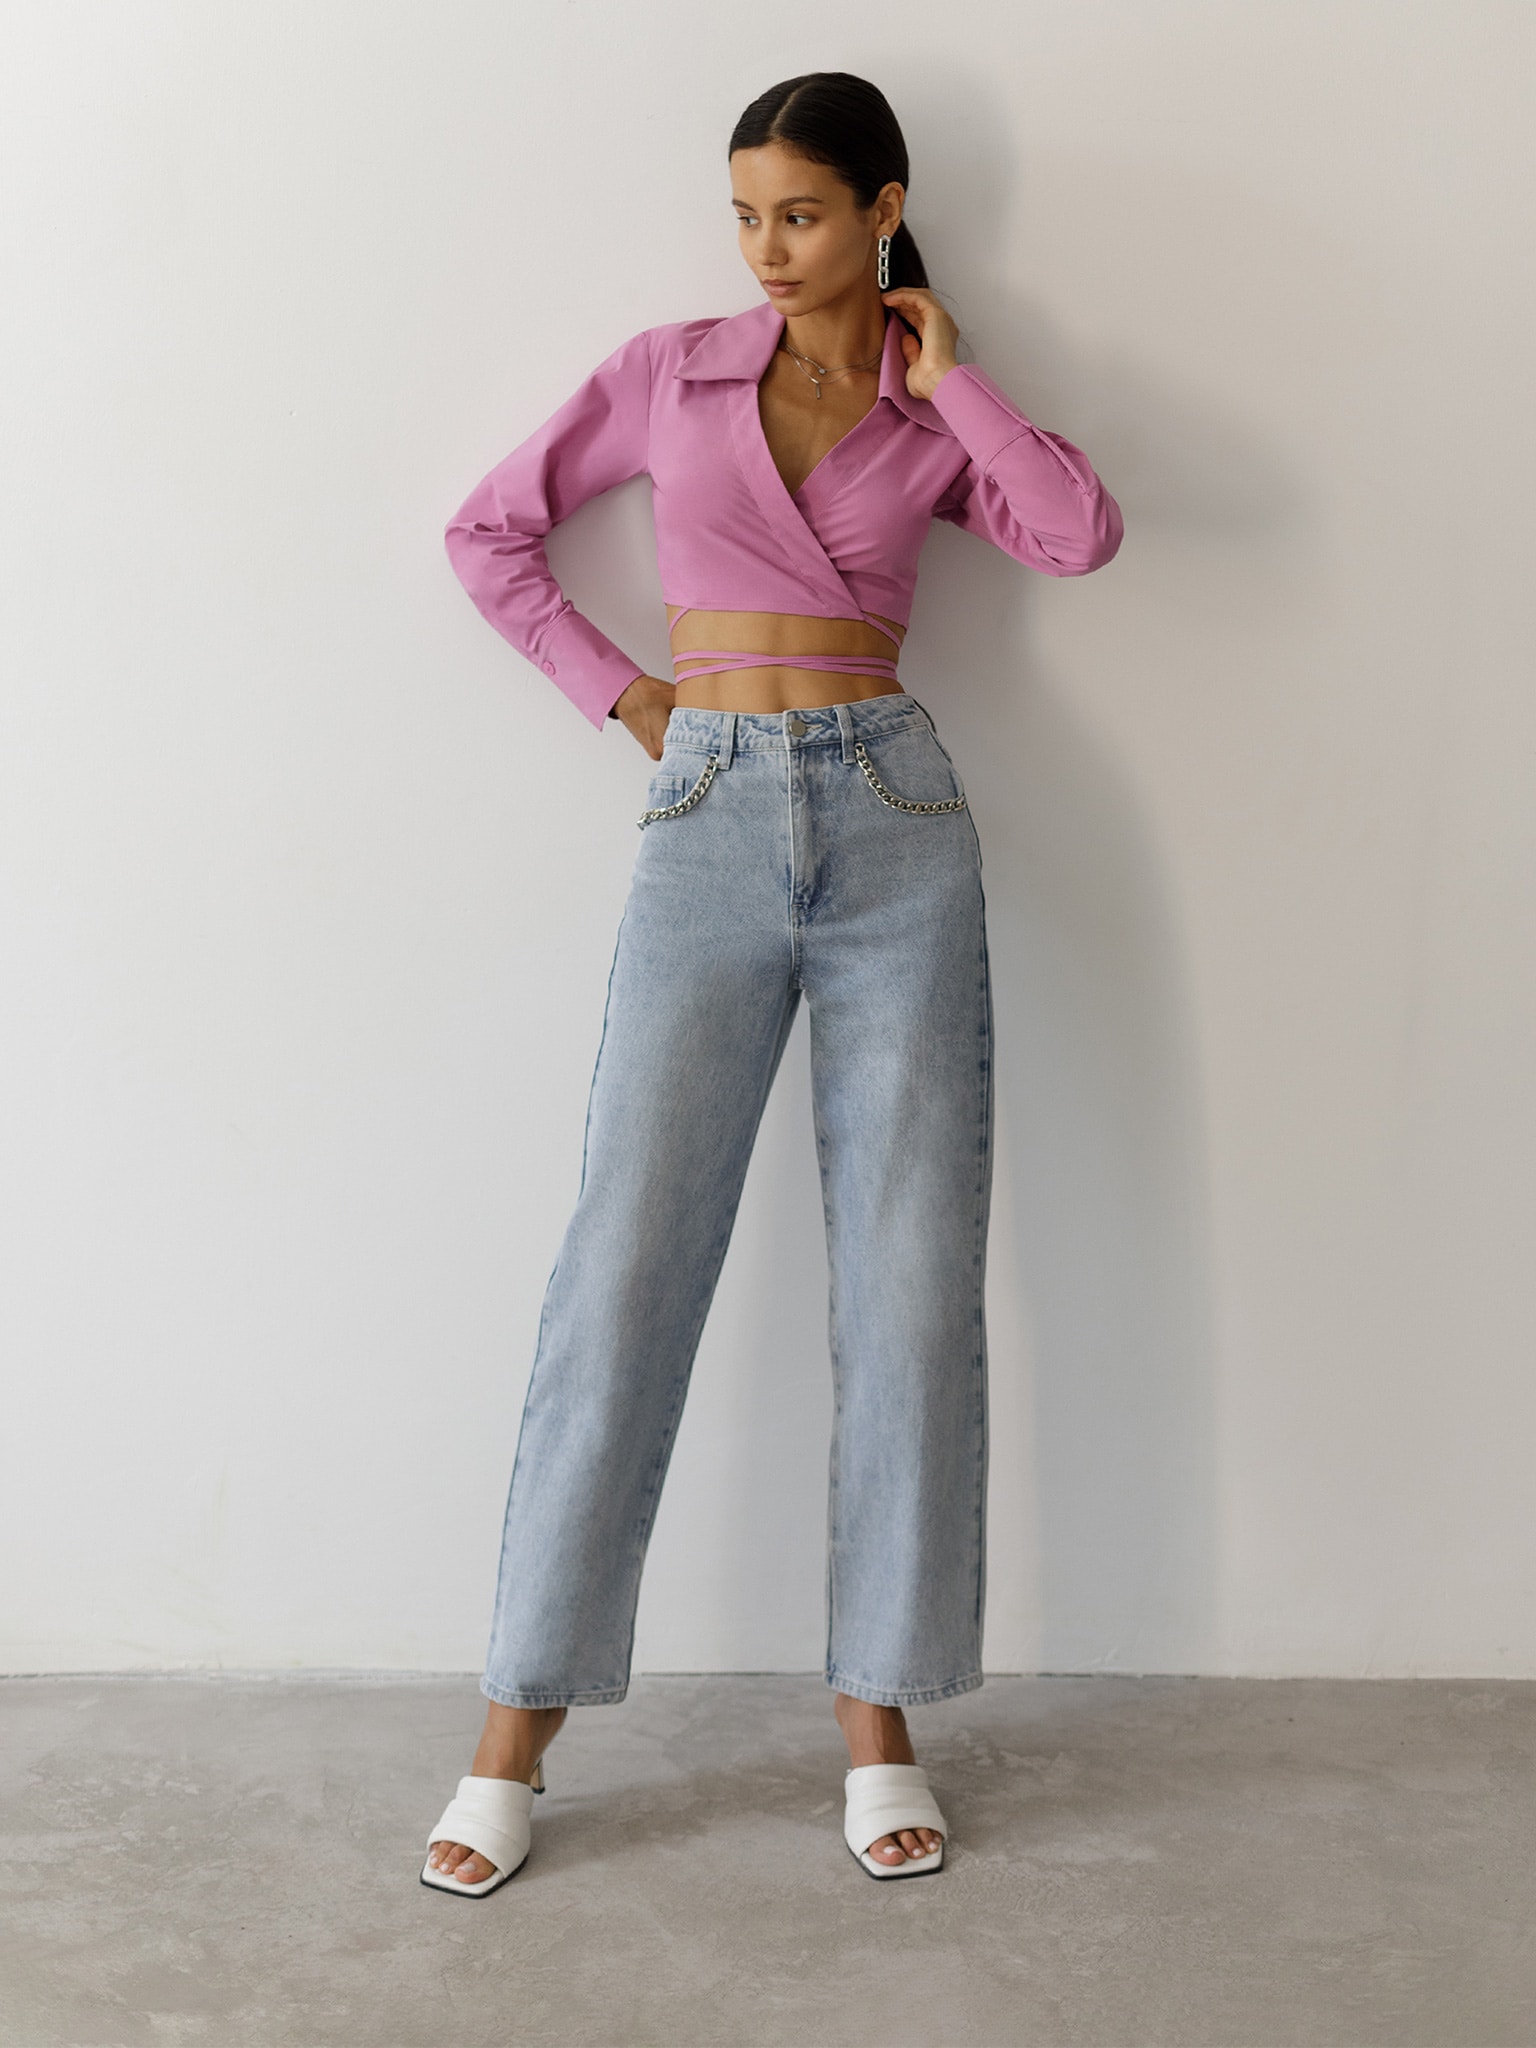 Self-tie cropped blouse